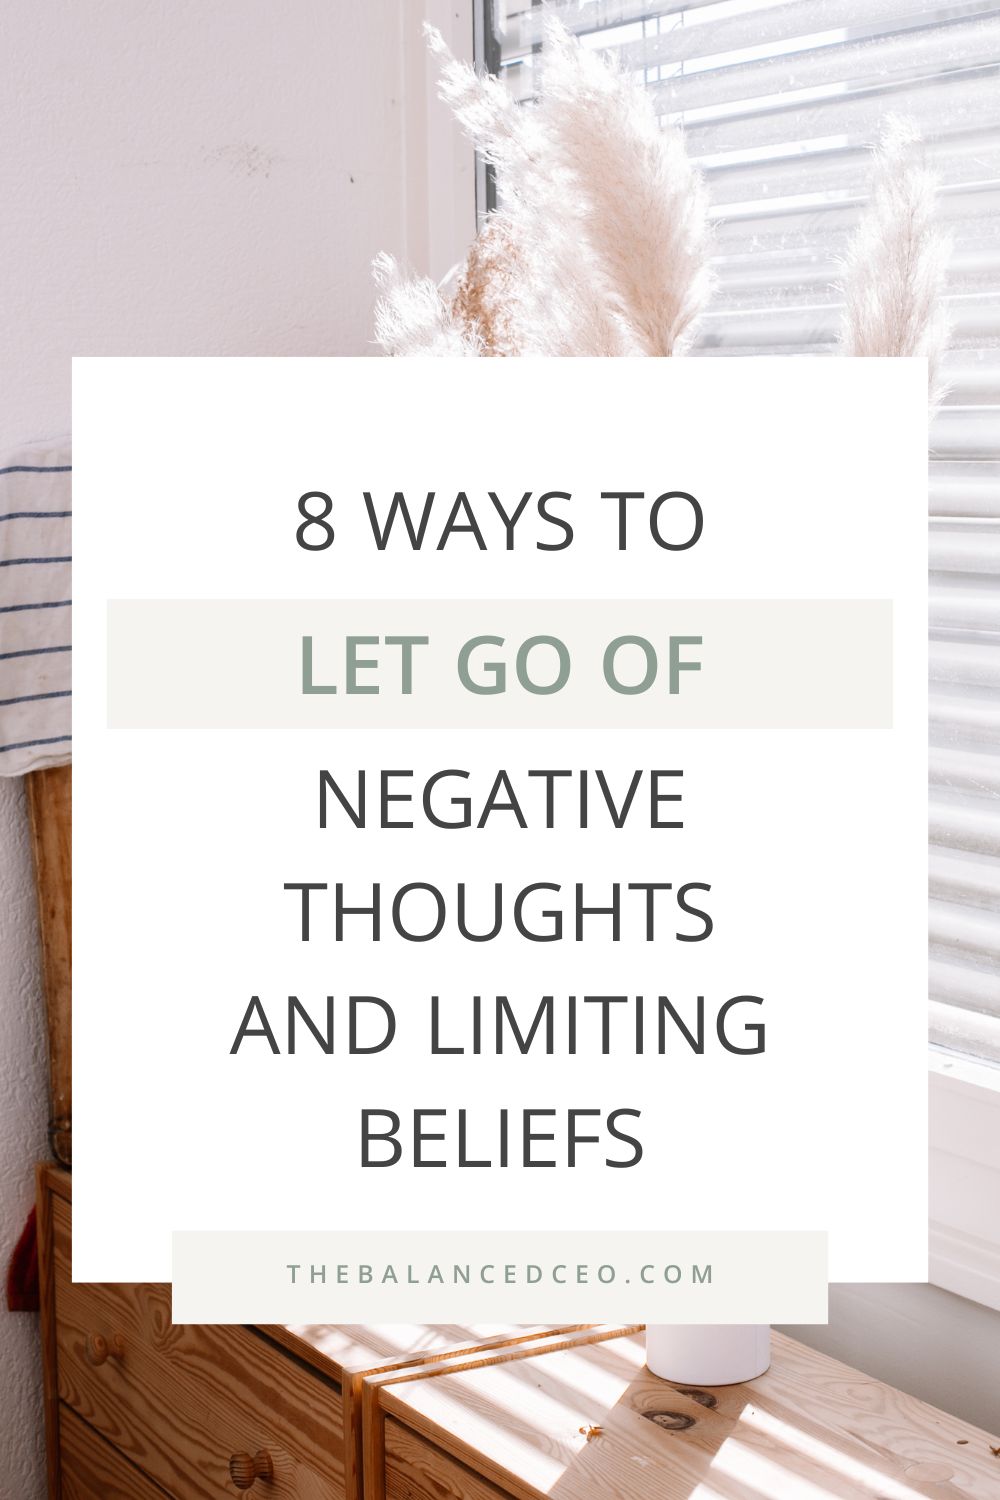 8 Ways to Let Go of Negative Thoughts and Limiting Beliefs